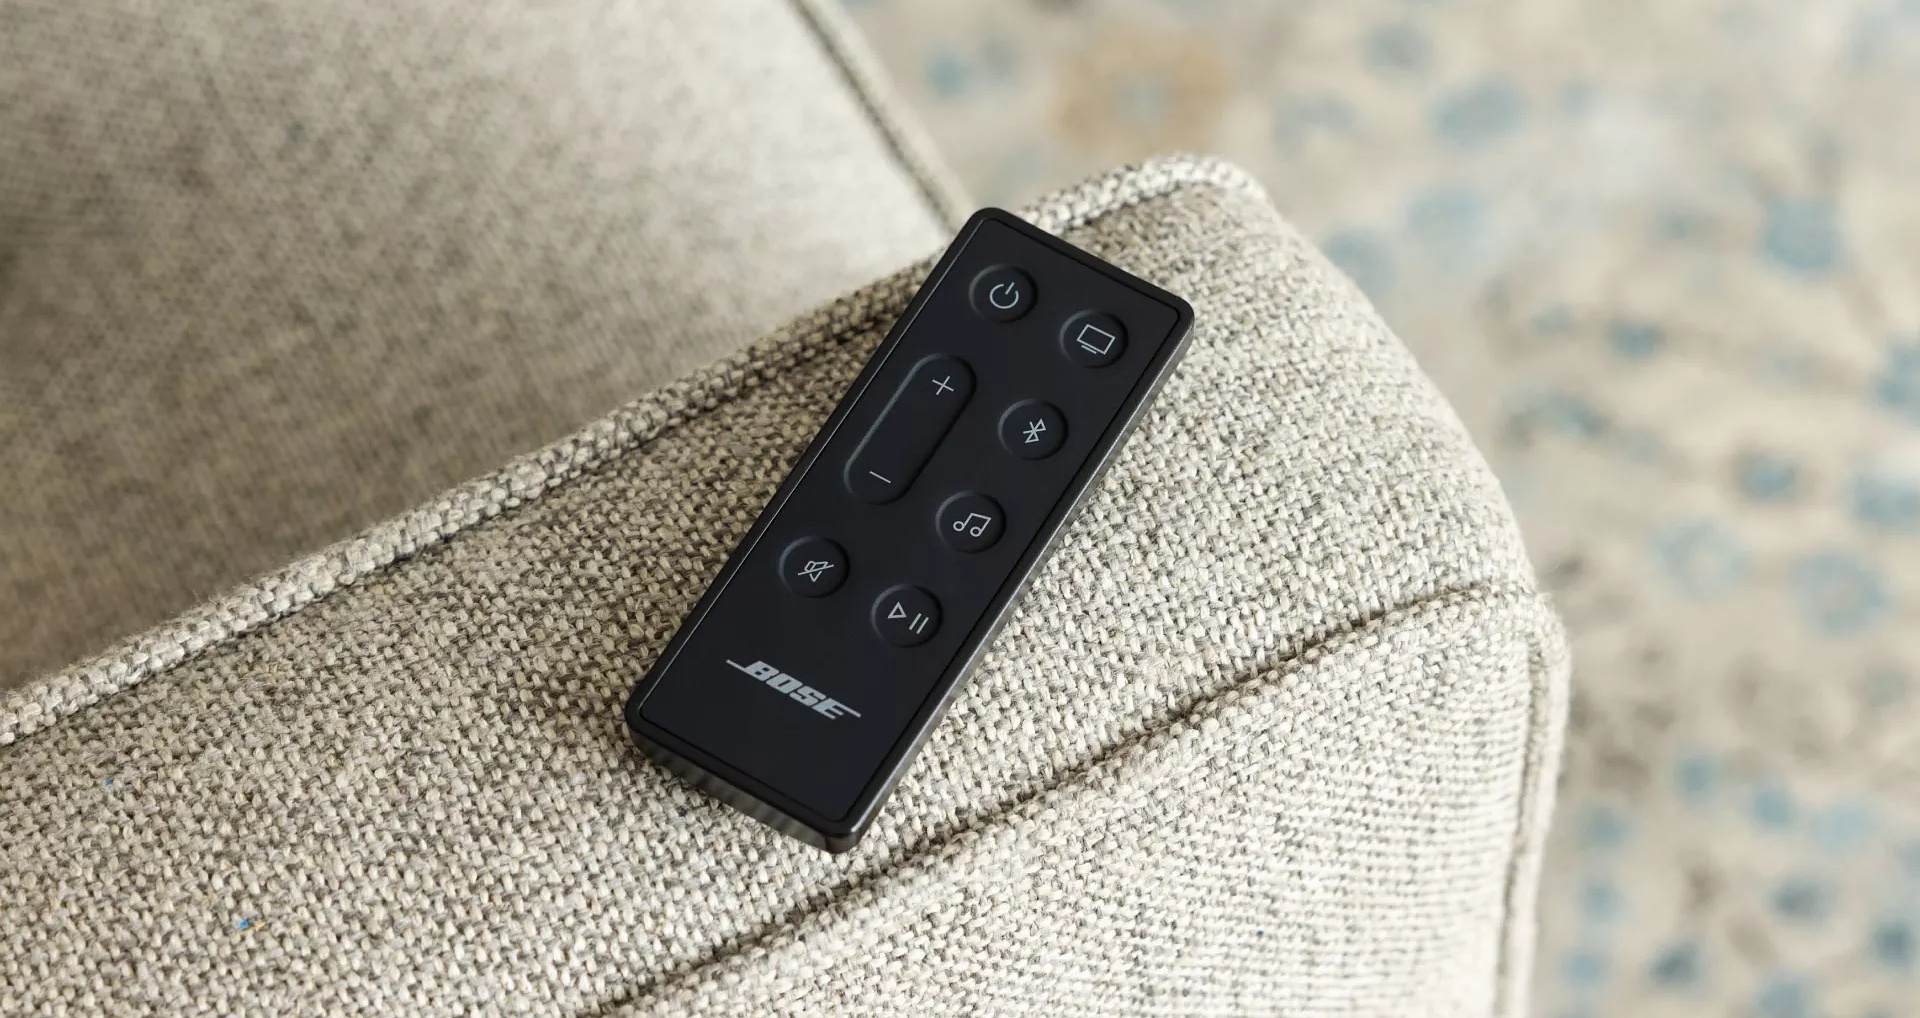 Bose Smart Soundbar 600 remote on the arm of a couch